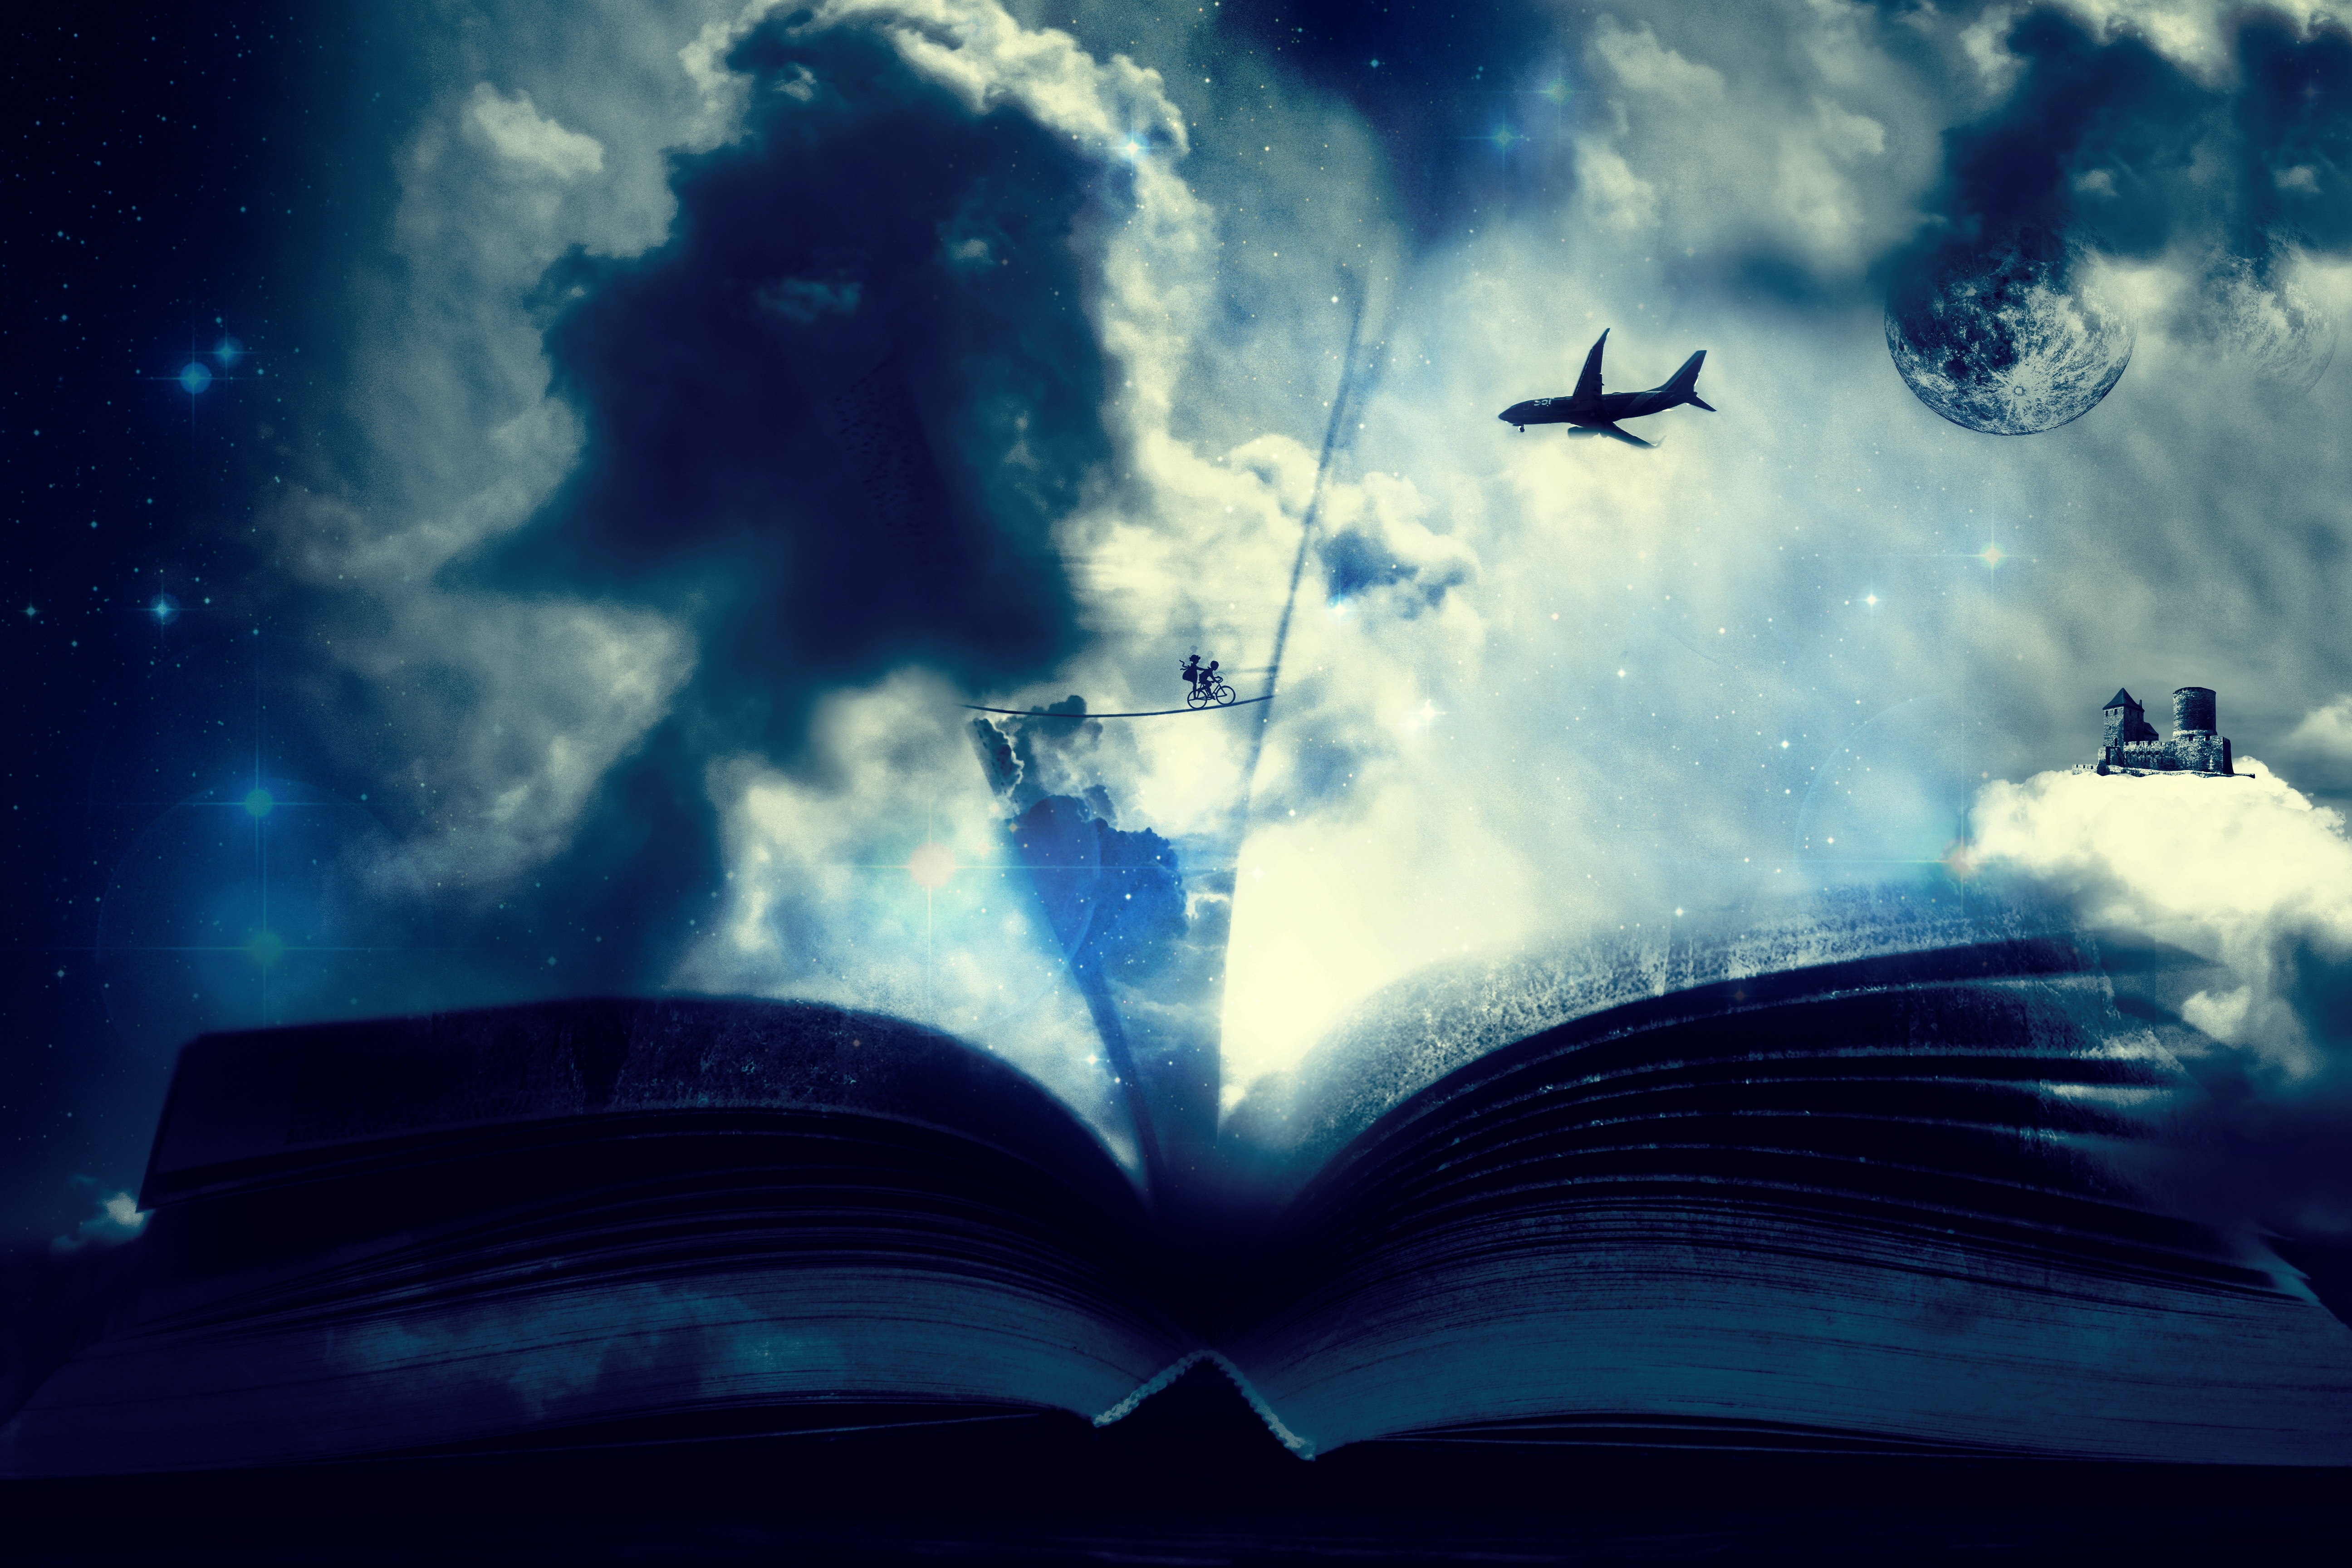 book, plane, fantasy, art, clouds, airplane, bicycle wallpaper for mobile